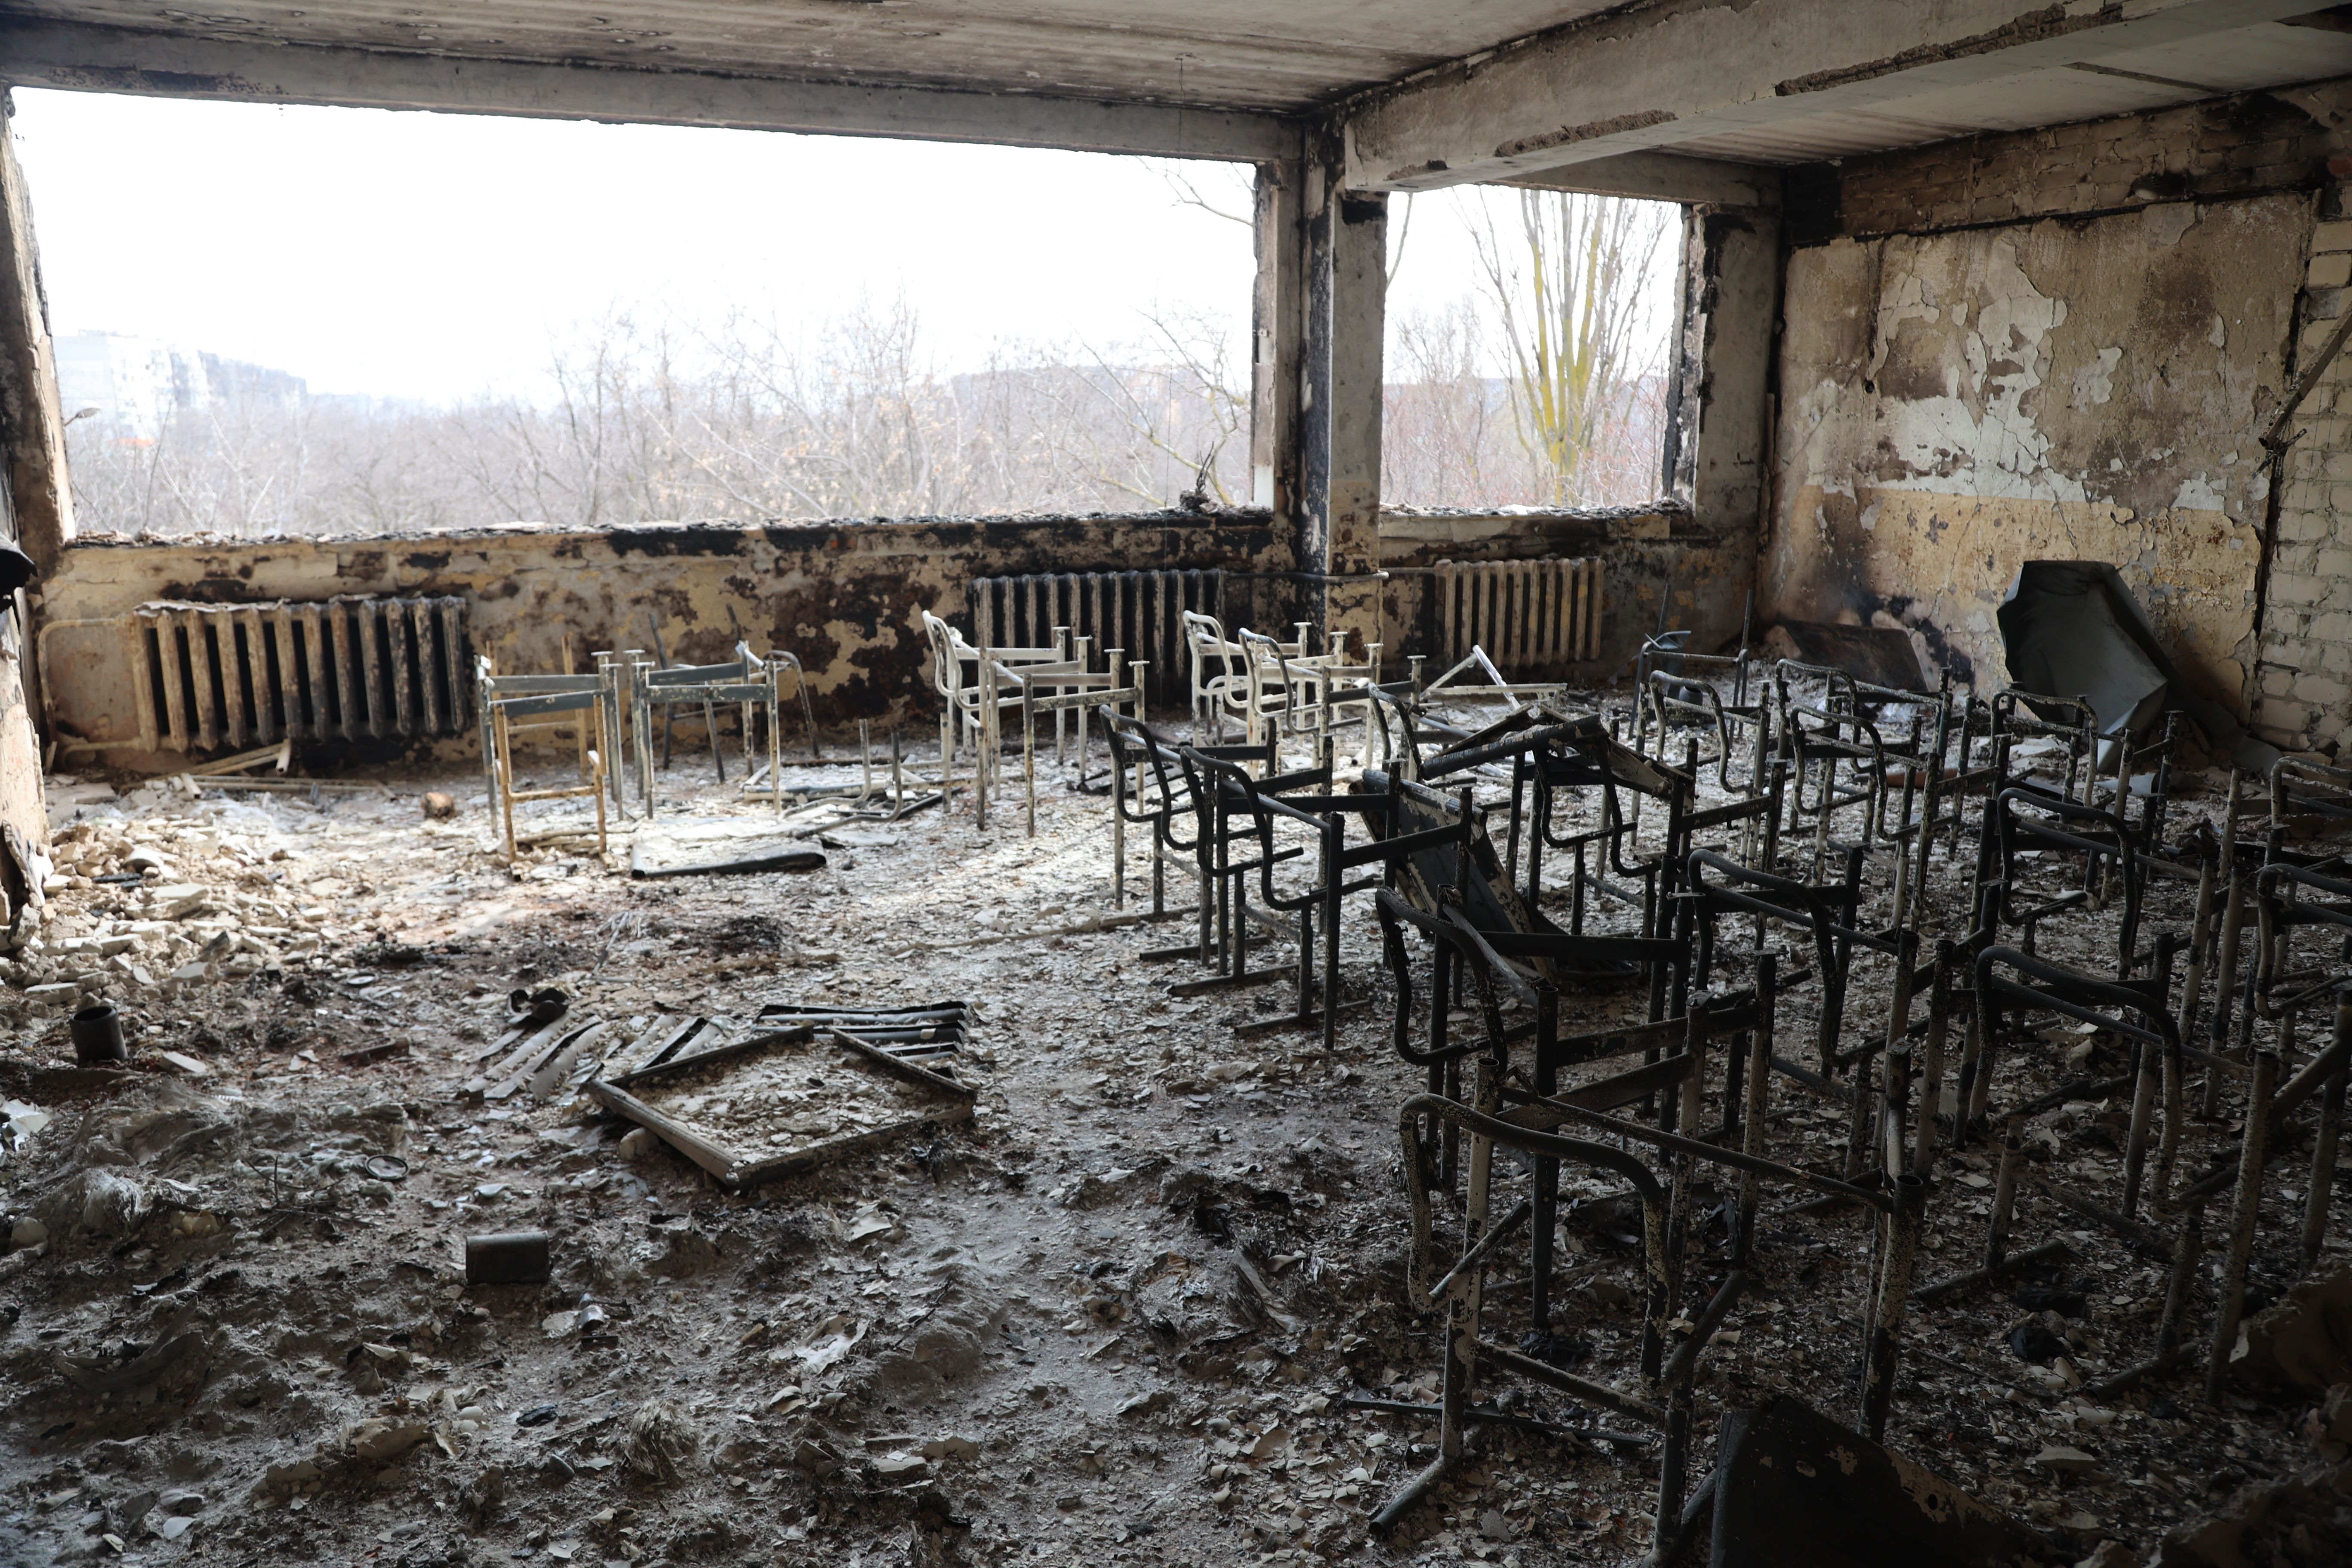     A view of the damaged school after the bombing of the Ukrainian city of Mariupol, which is under the control of the Russian army and pro-Russian separatists, on March 29.